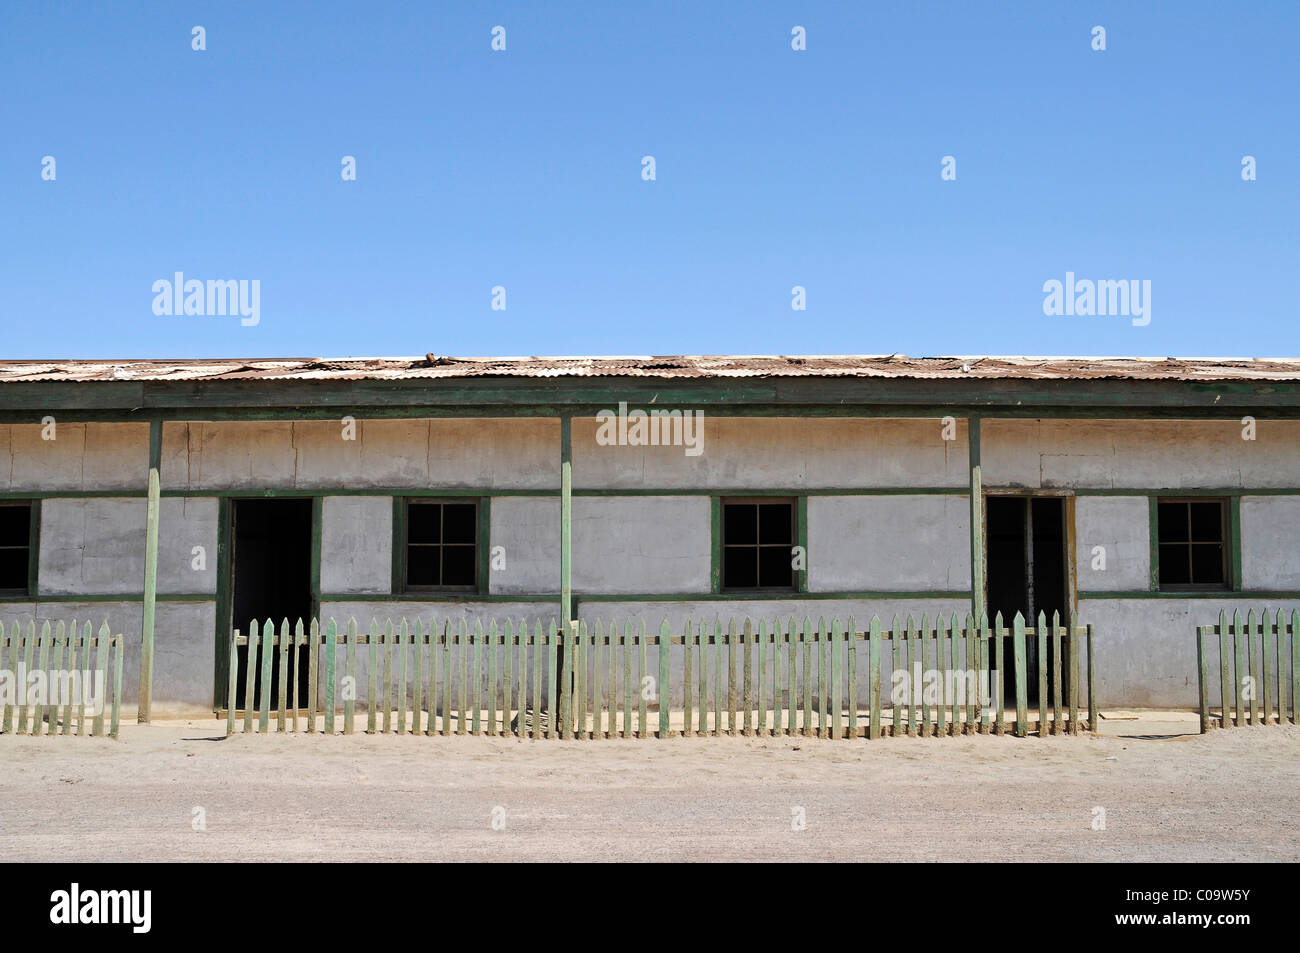 Workers' housing, houses, road, saltpeter, abandoned salpeter town, ghost town, desert, museum, Unesco World Heritage Site Stock Photo